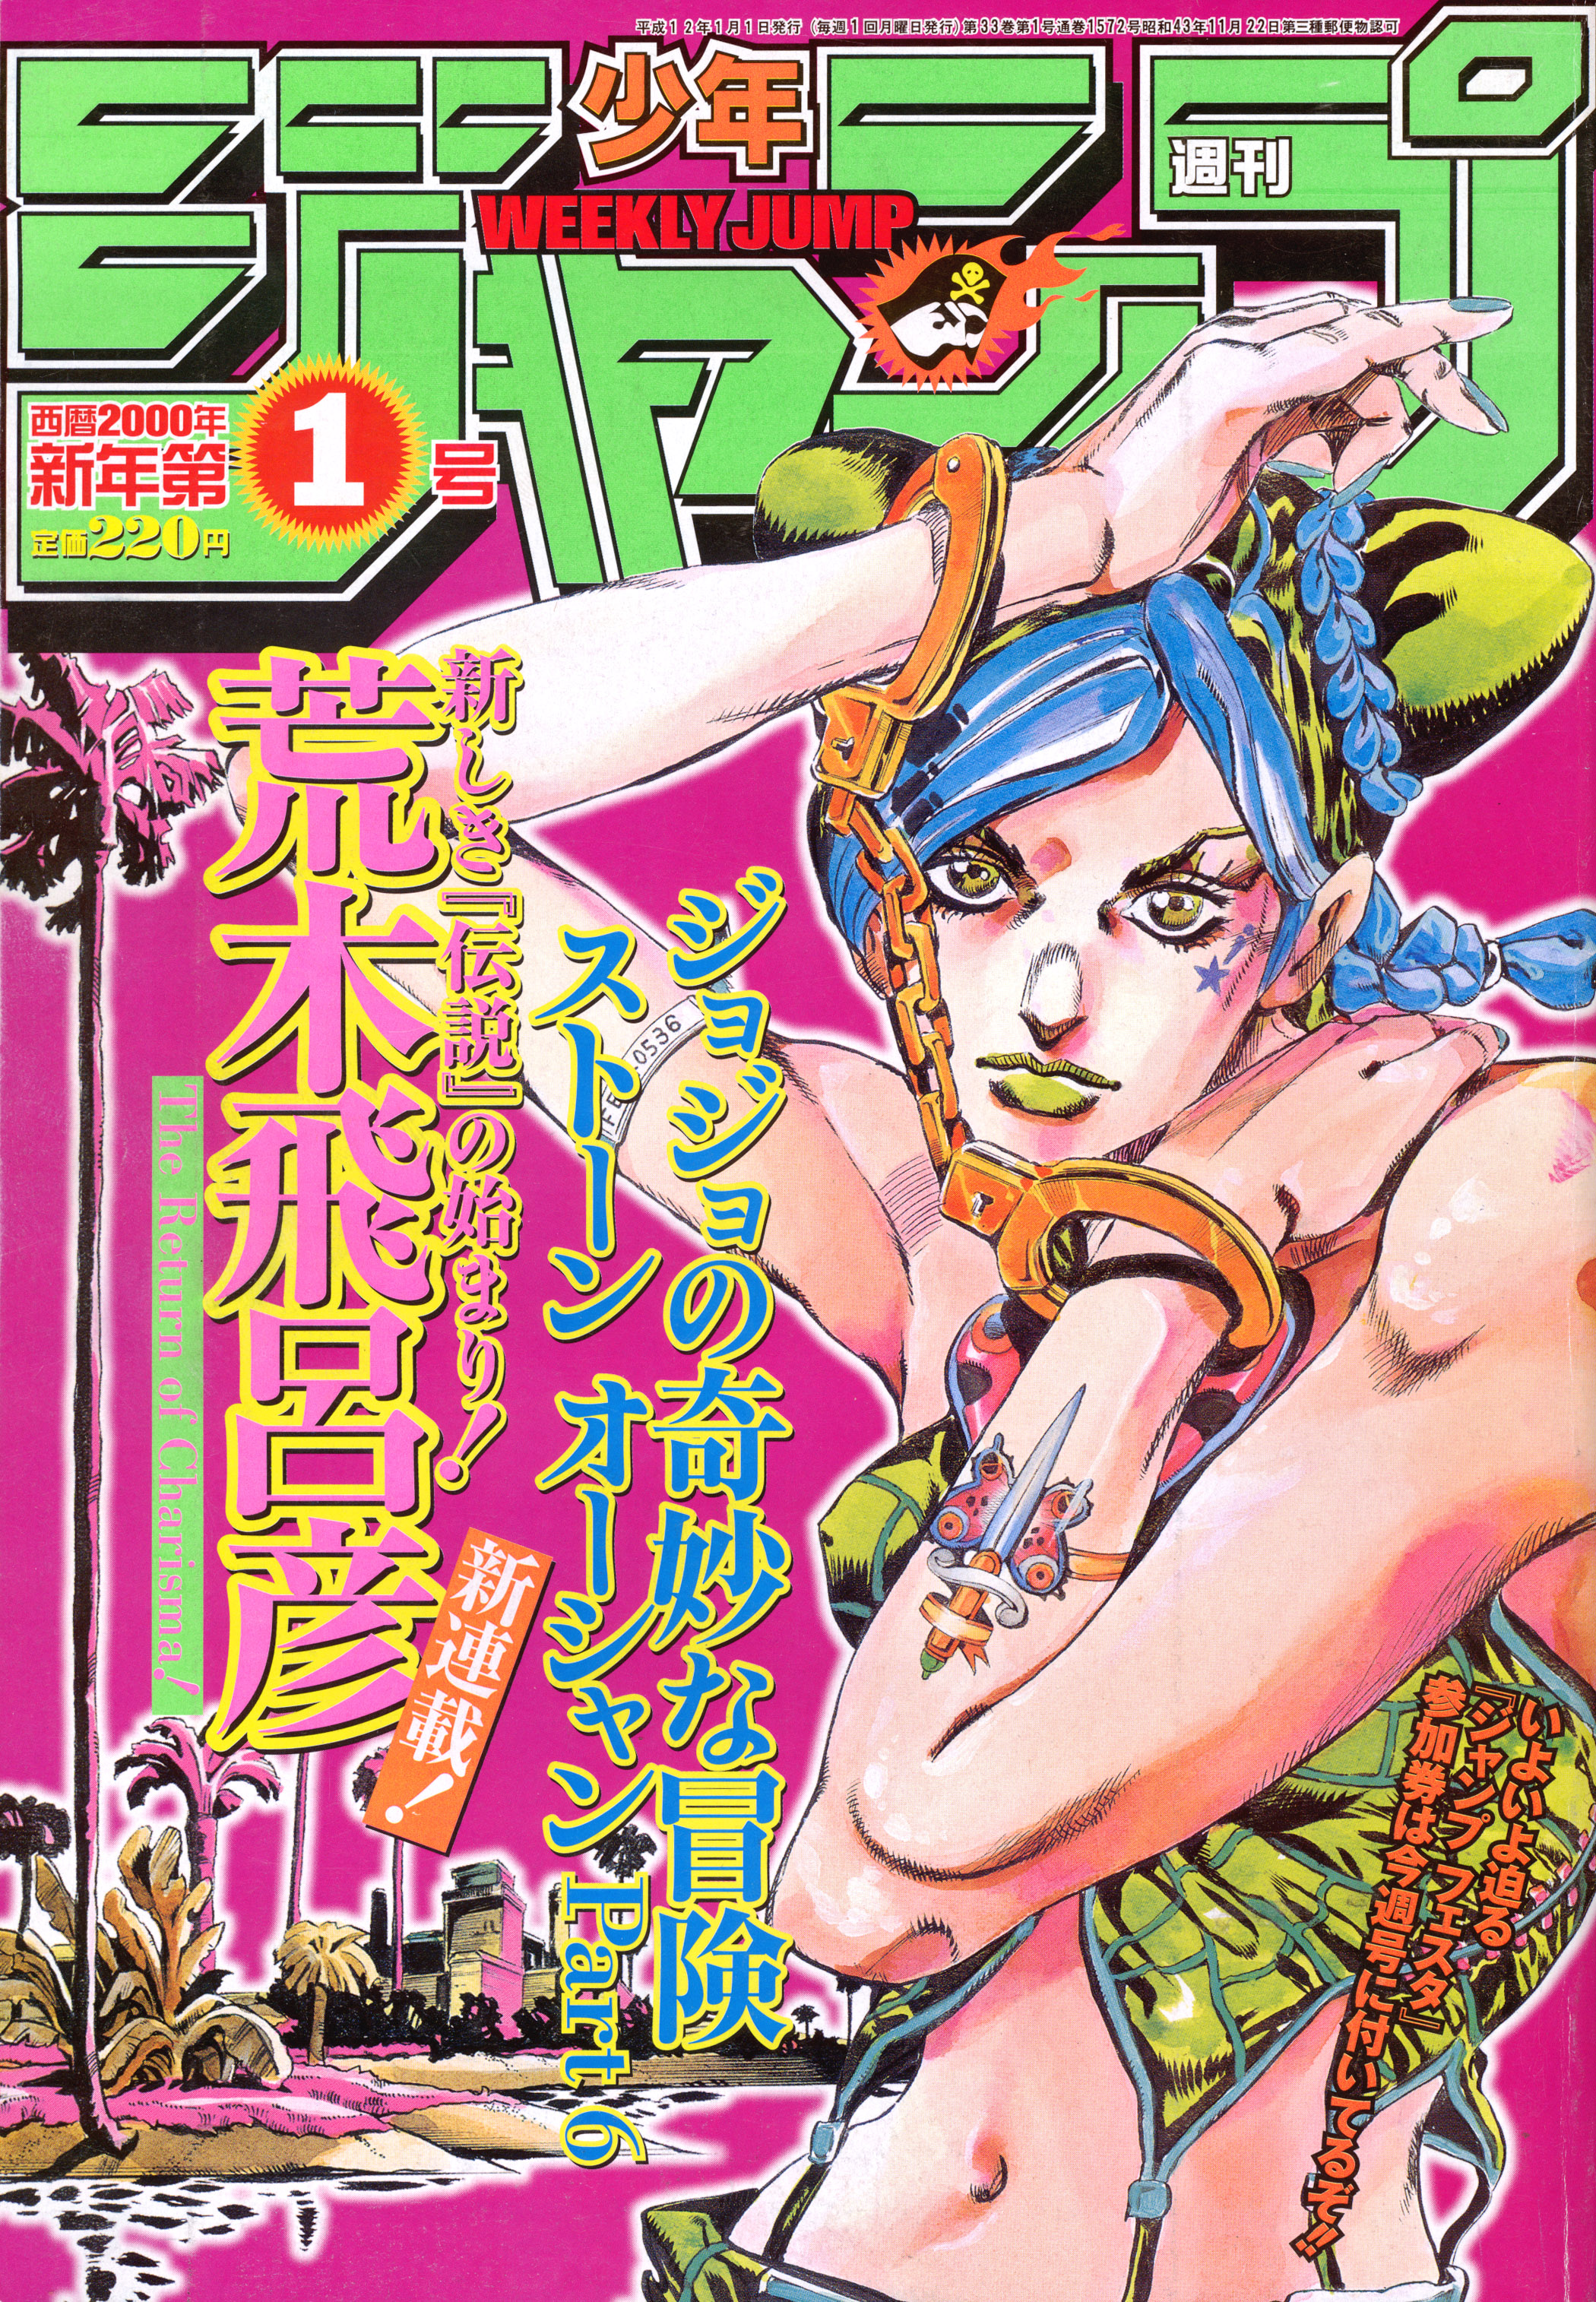 Is Stone Ocean Confirmed? (@Pt6Confirmation) / X